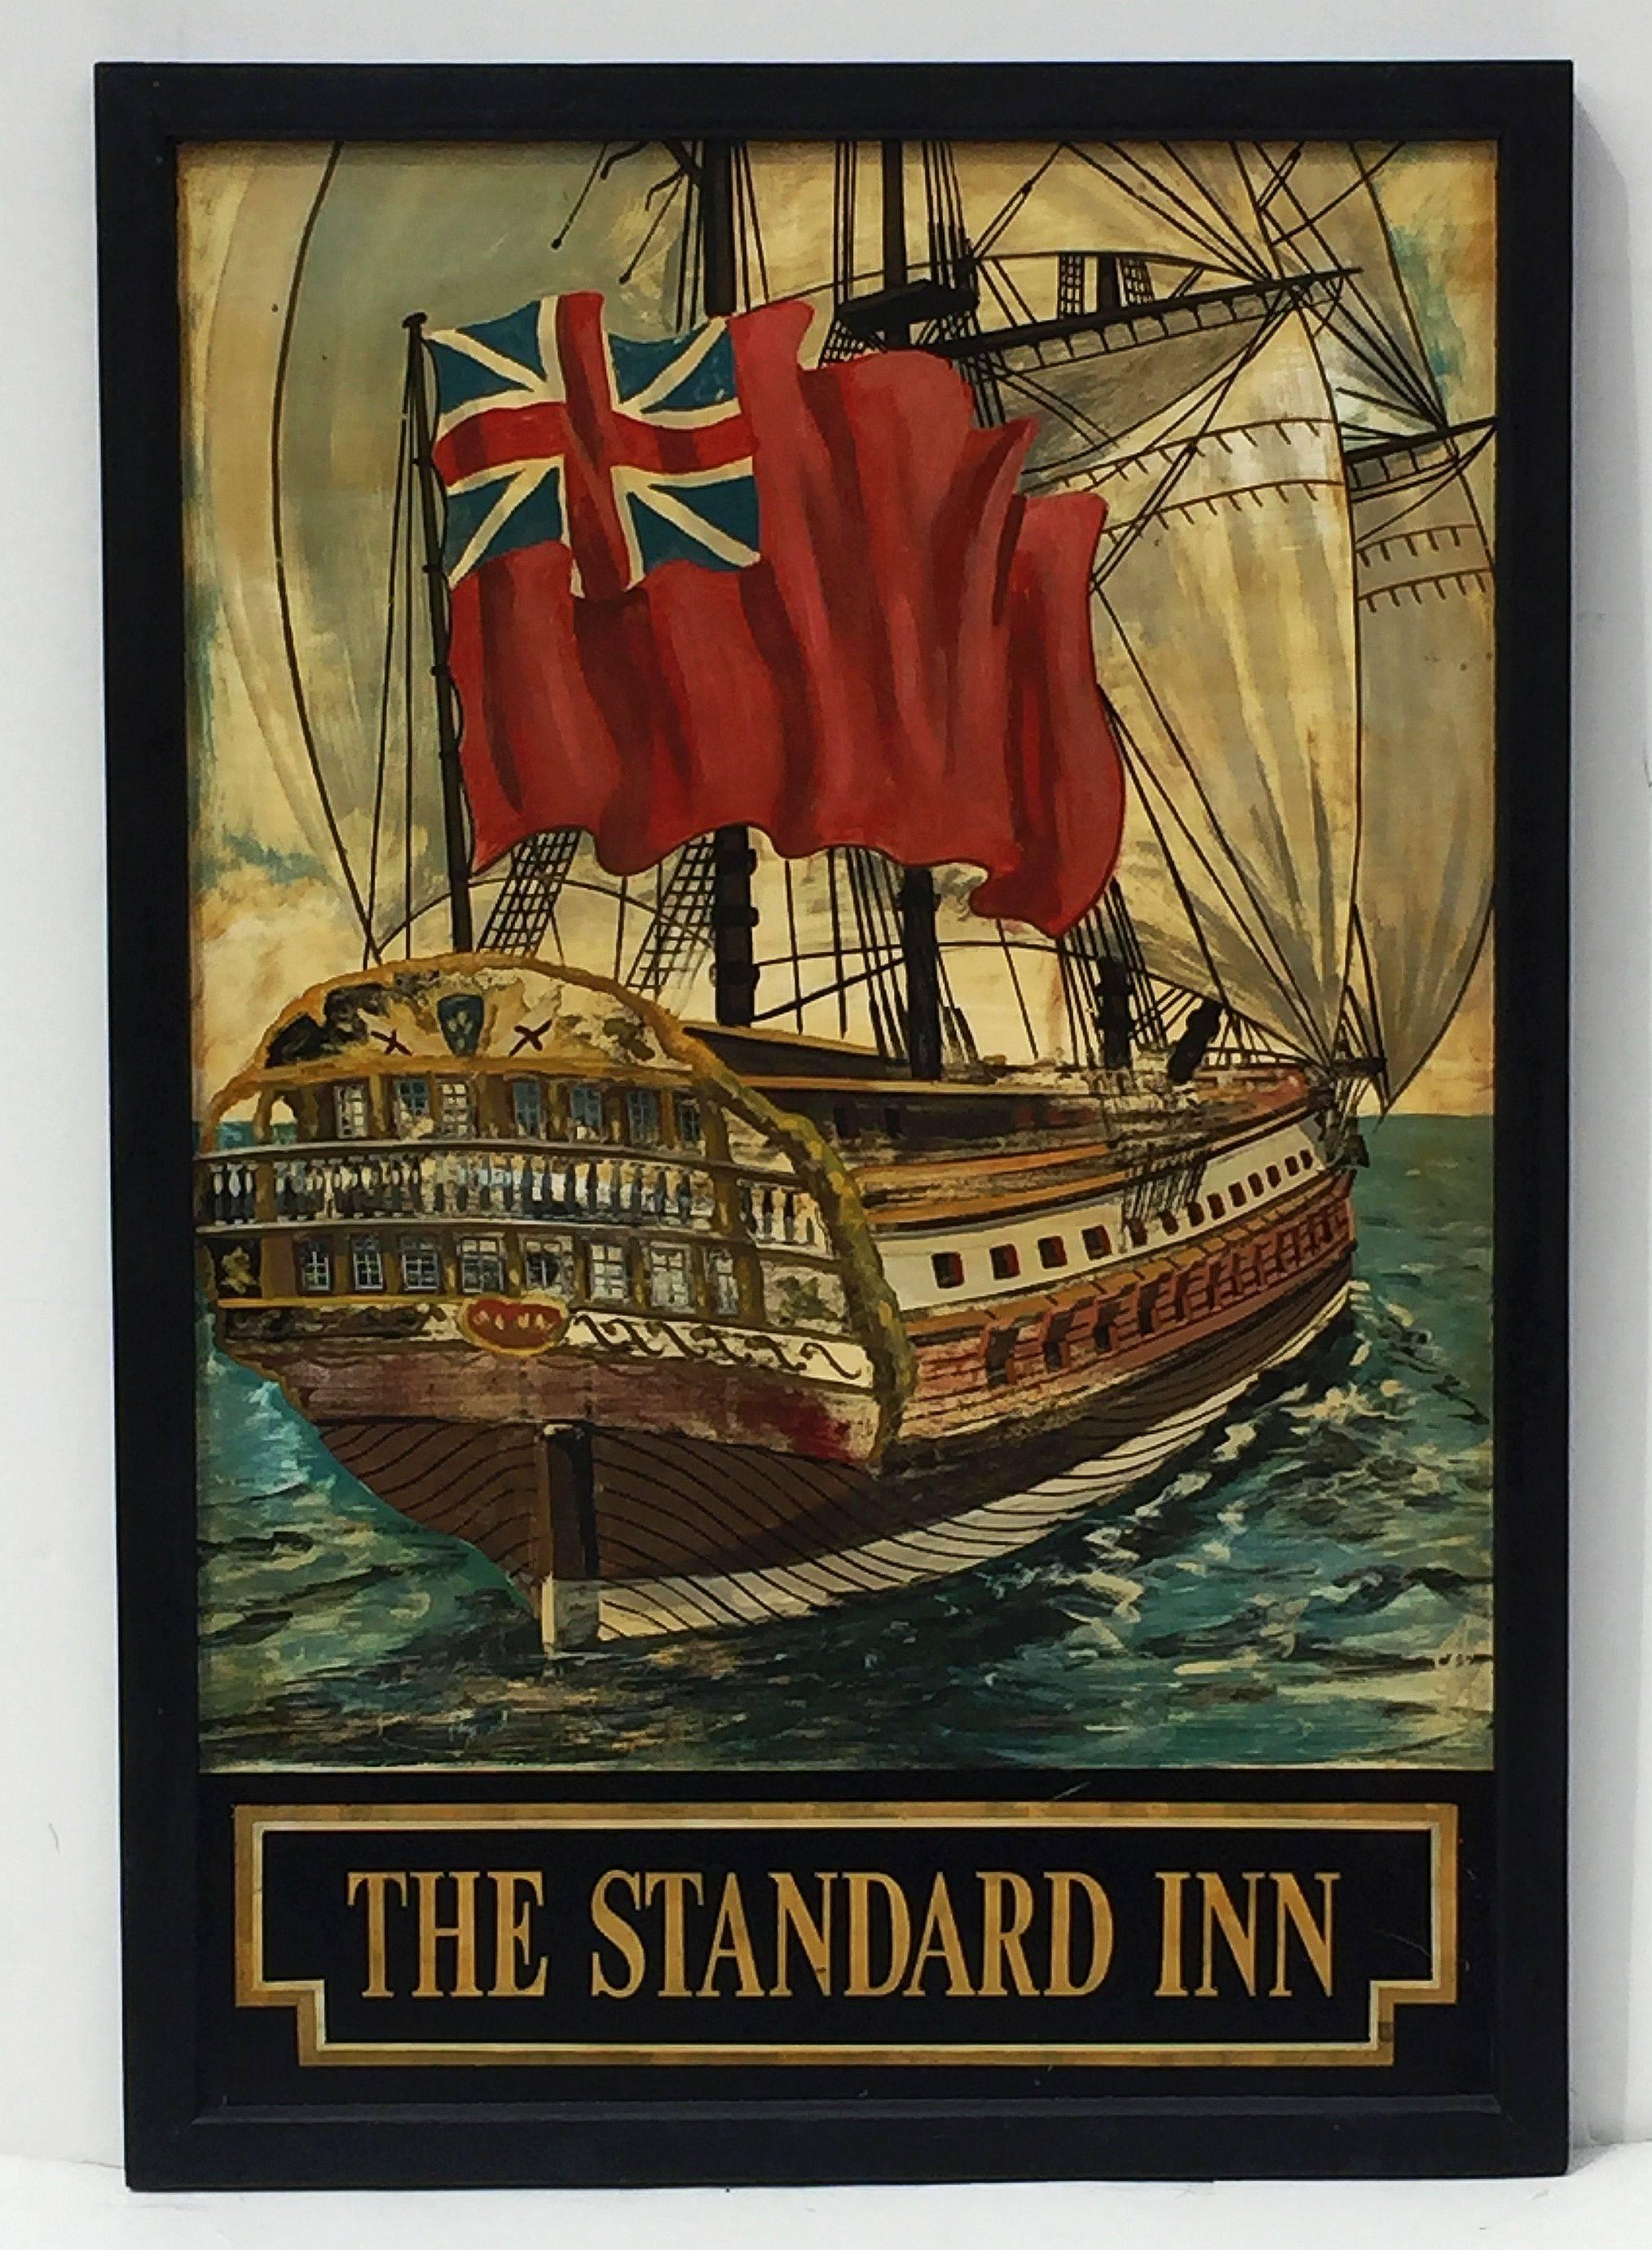 An authentic English pub sign (one-sided) featuring a painting of the stern of a sailing ship and British naval ensign flag, entitled: The Standard Inn

A very fine example of vintage advertising artwork, ready for display.